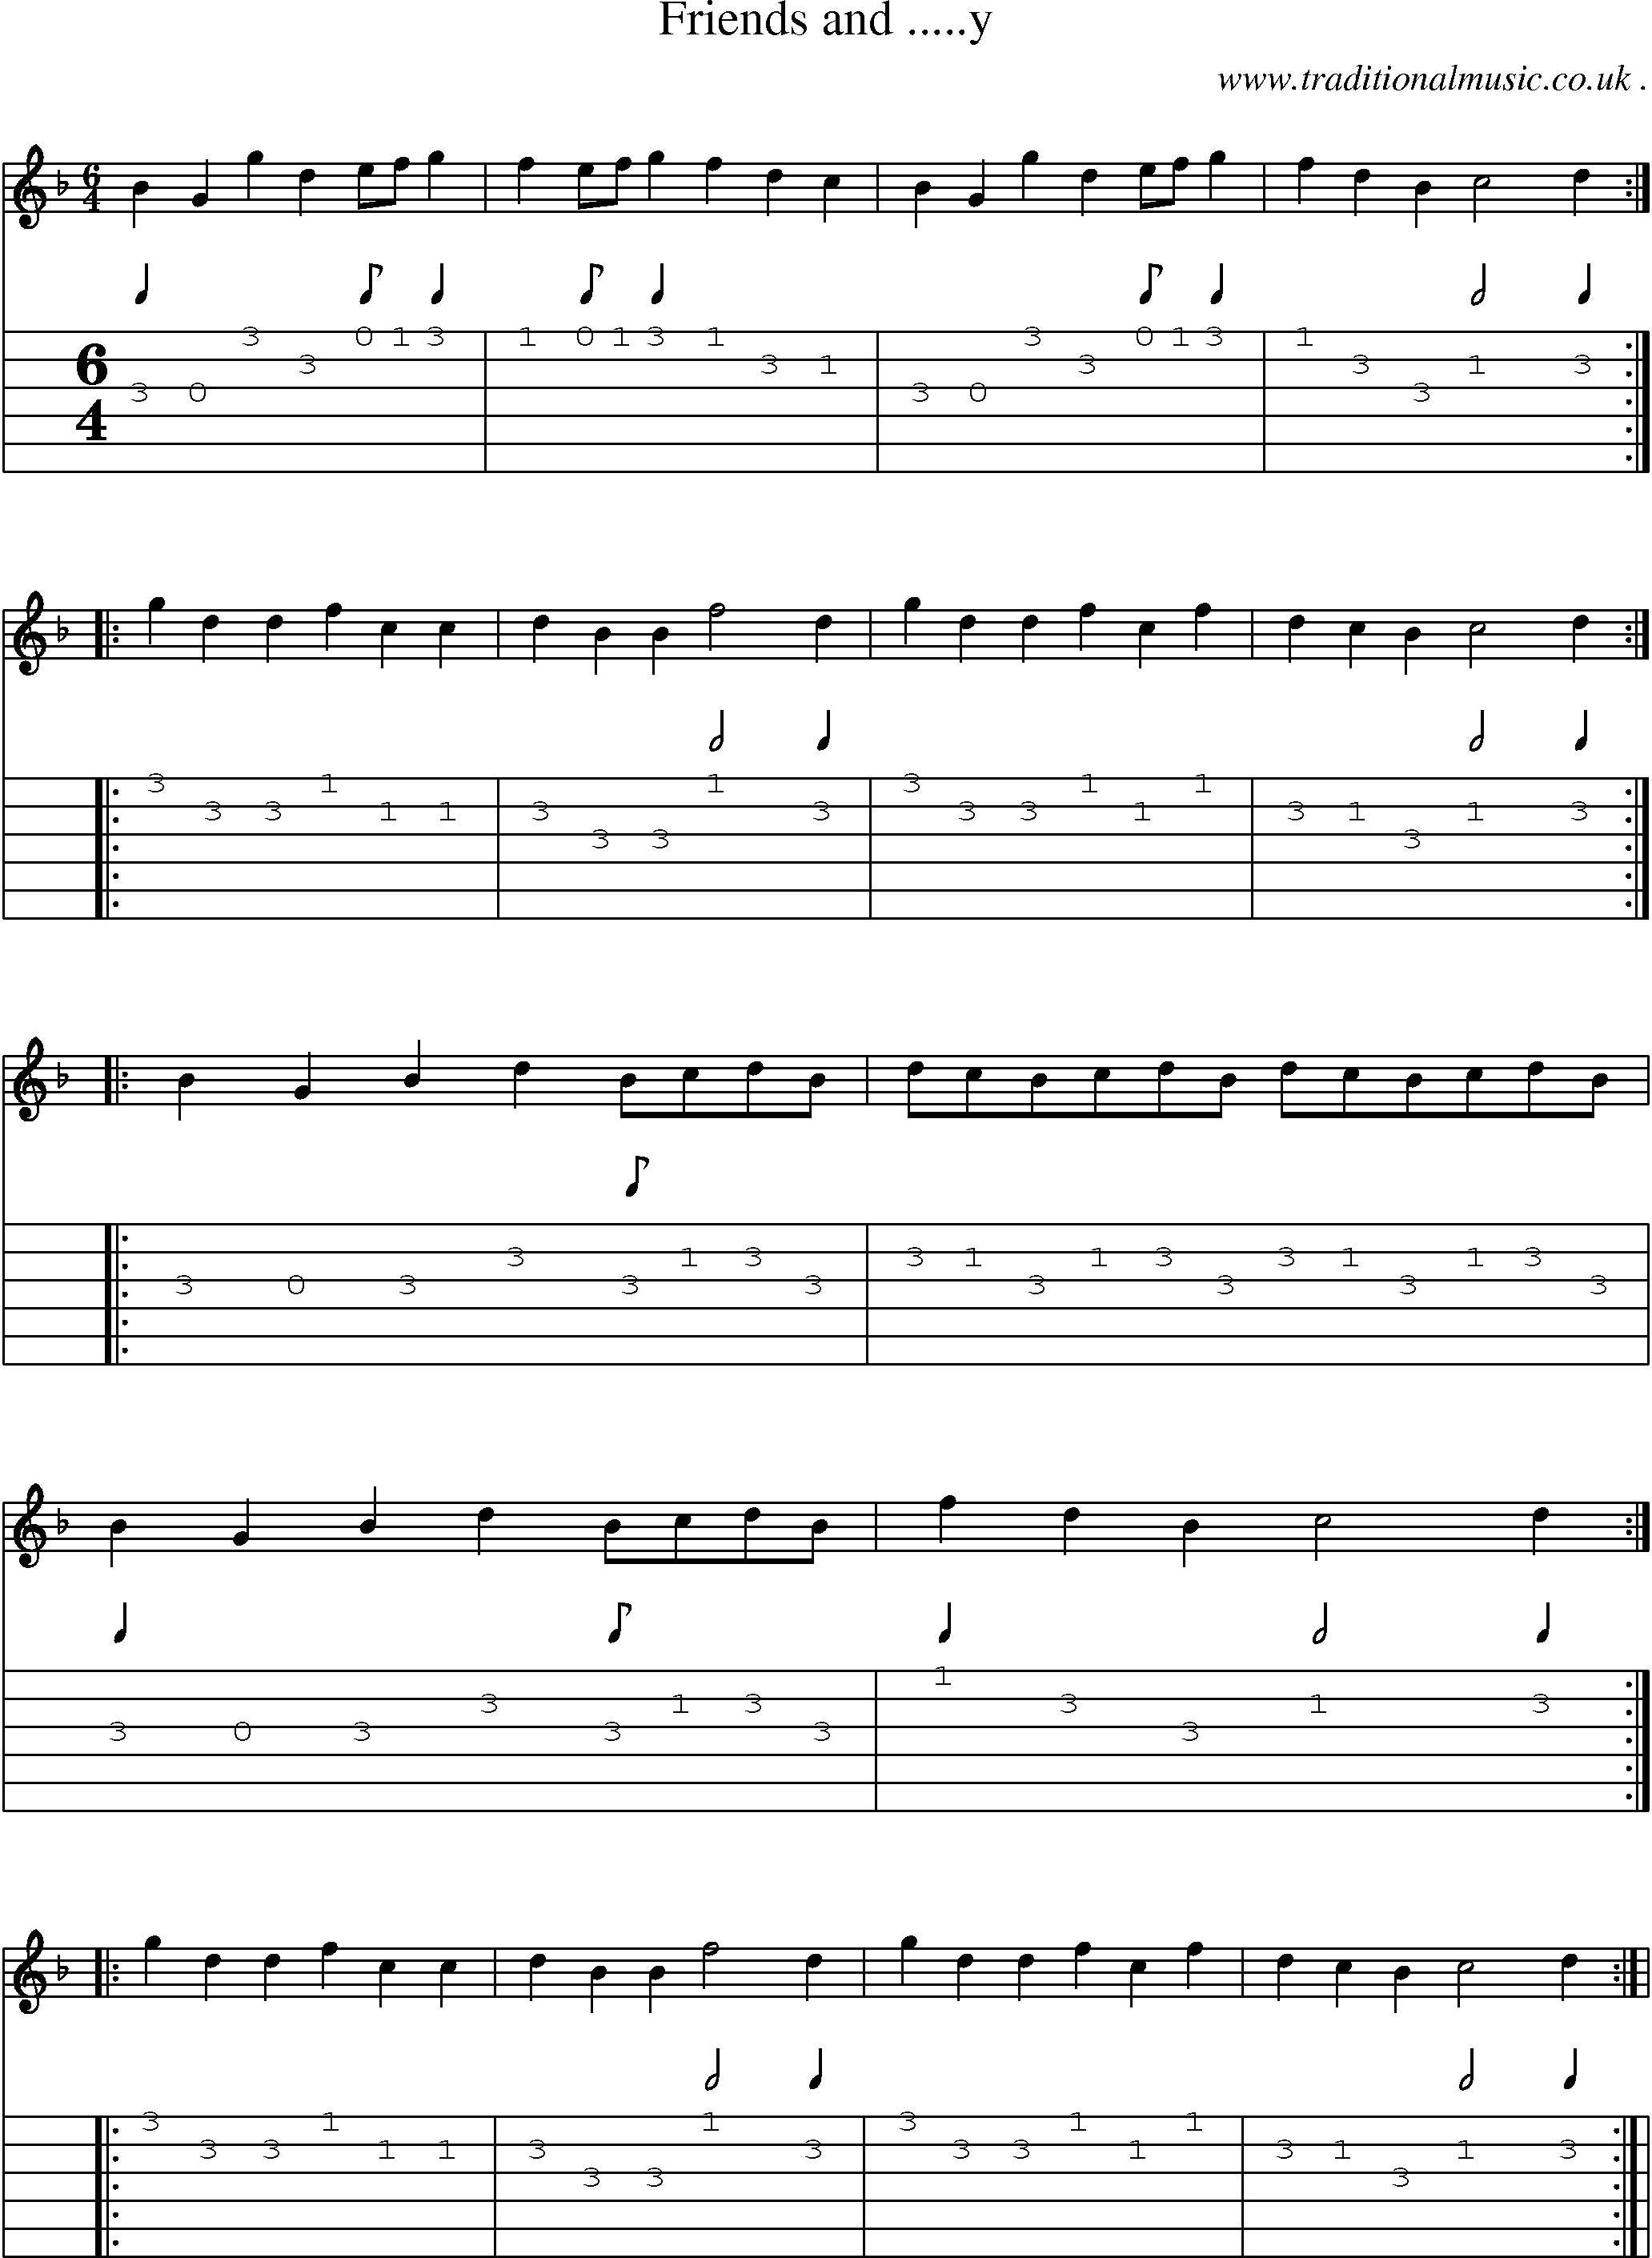 Sheet-Music and Guitar Tabs for Friends And Y